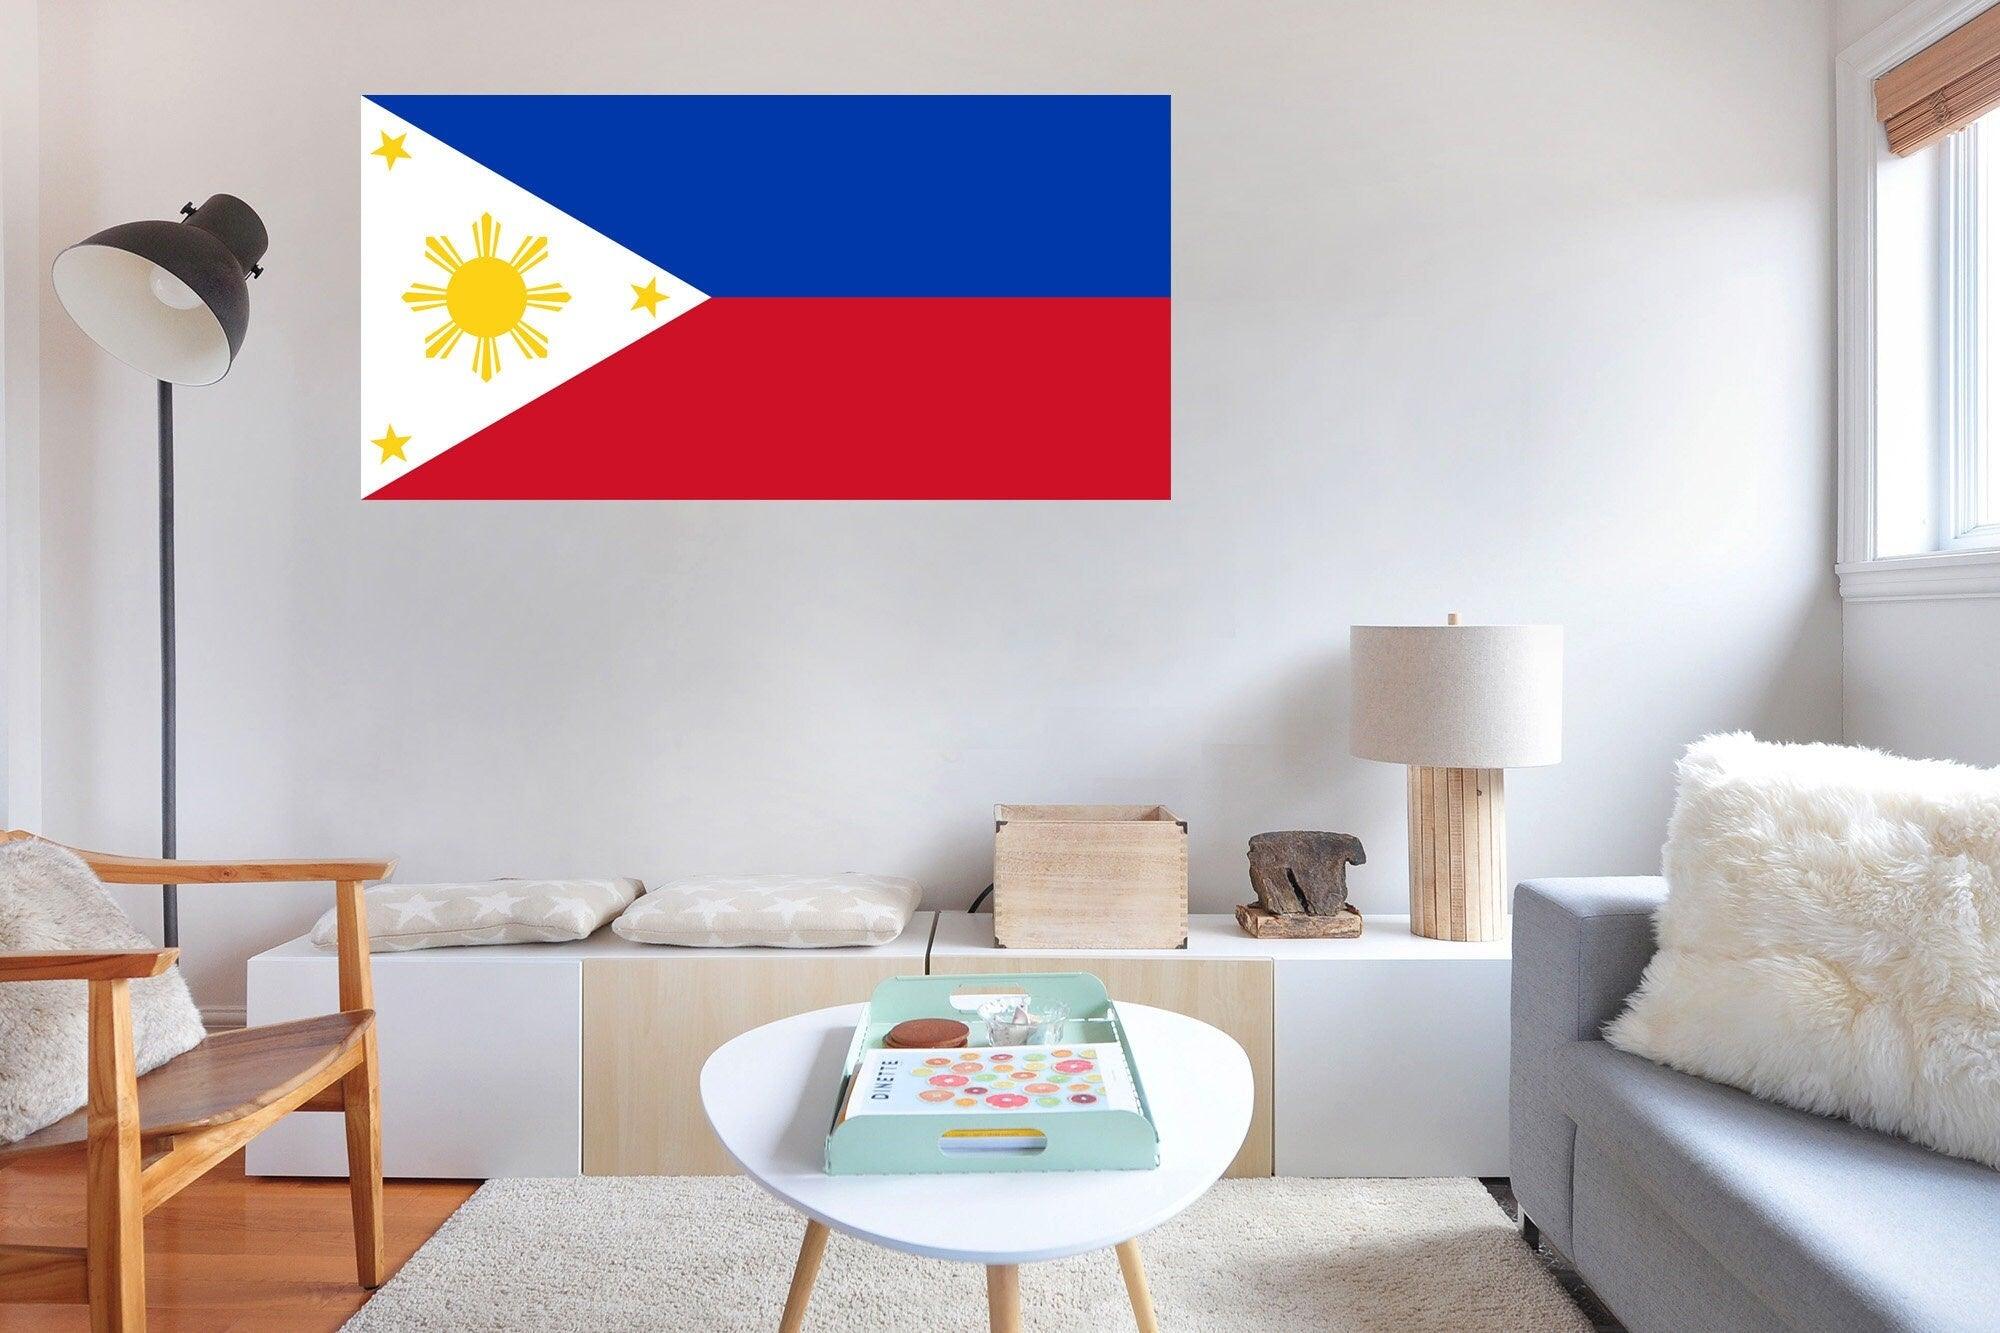 Filipino Flag Decal, wall Decal, Easily removed, Easily installed Filipino Flag sticker decal